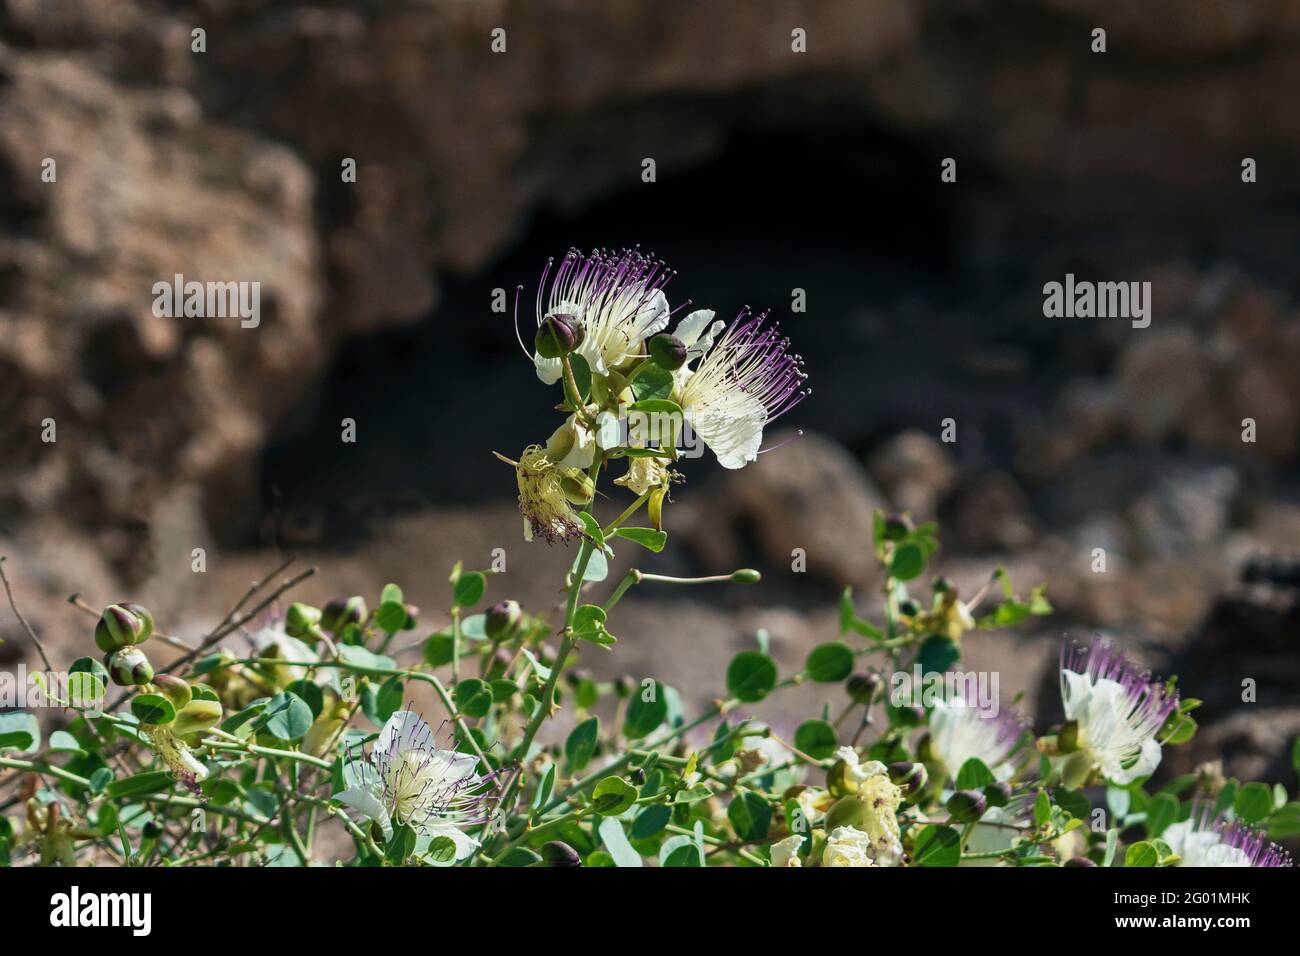 thorny caper bush Capparis spinosa flowers on a rocky ledge in the Negev desert with a blurred dark chert cliff in the background Stock Photo